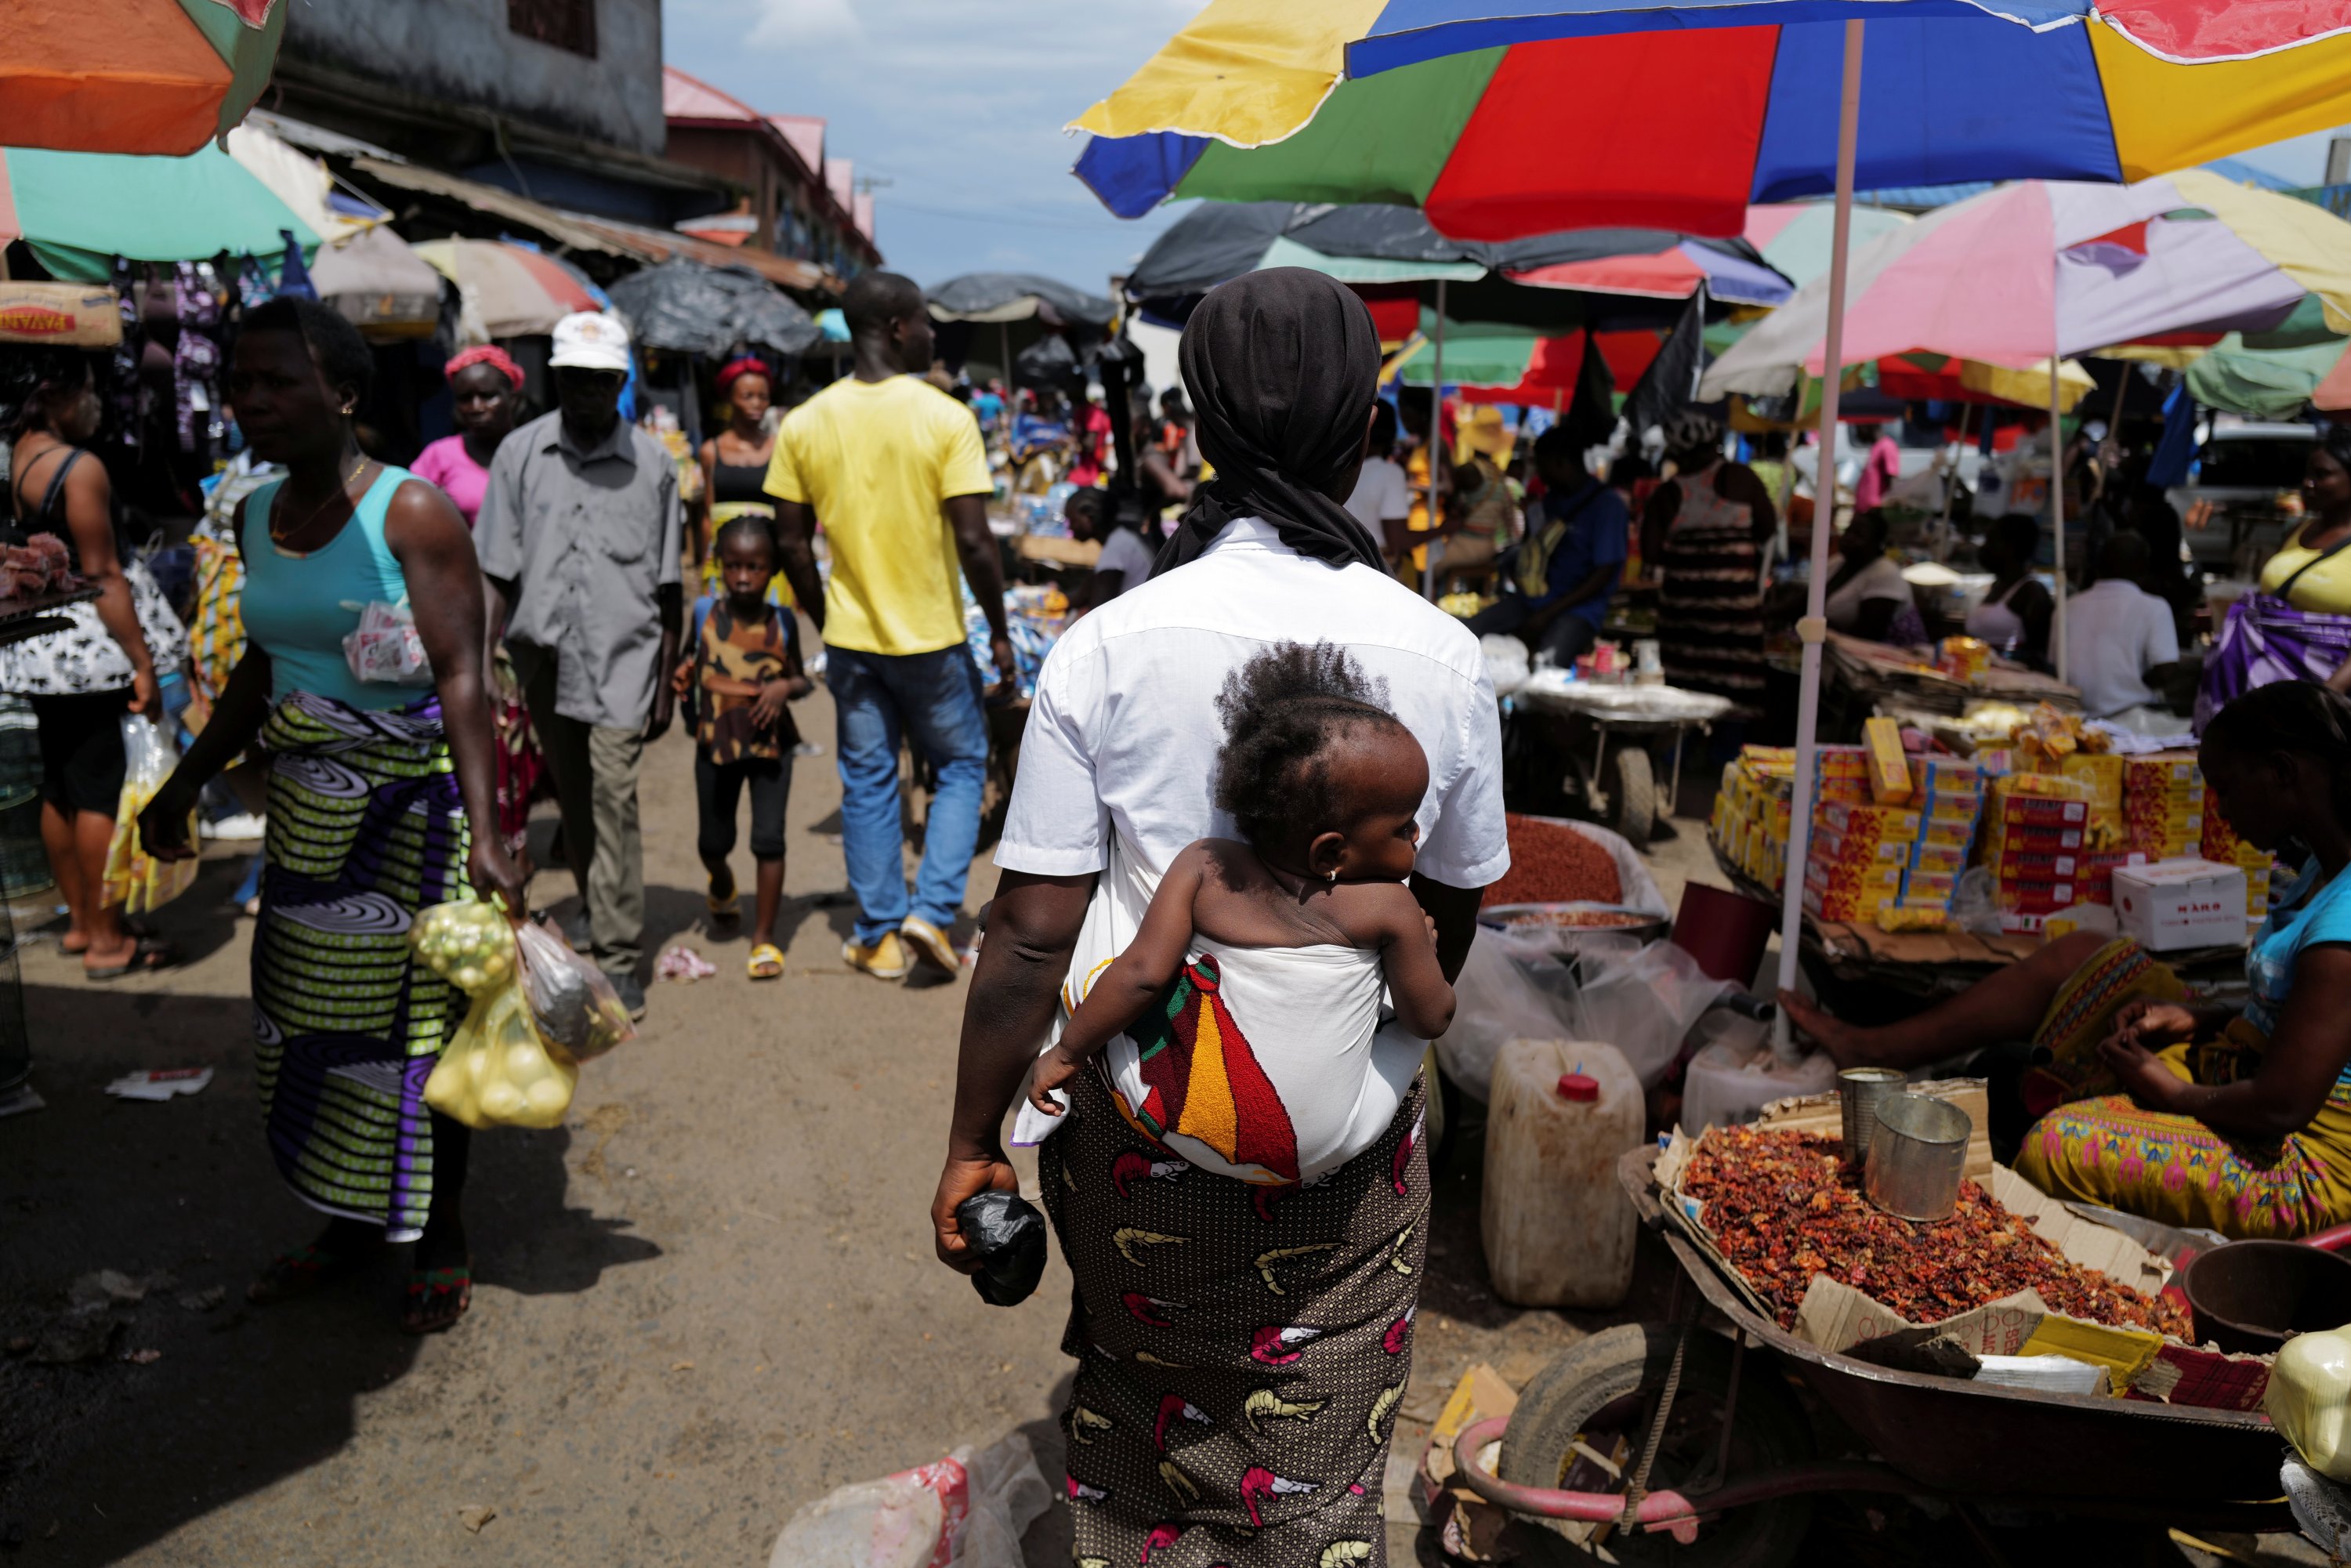 A woman carries her daughter as she walks at the Gobachop market in Monrovia, Liberia, June 7, 2021. (REUTERS)